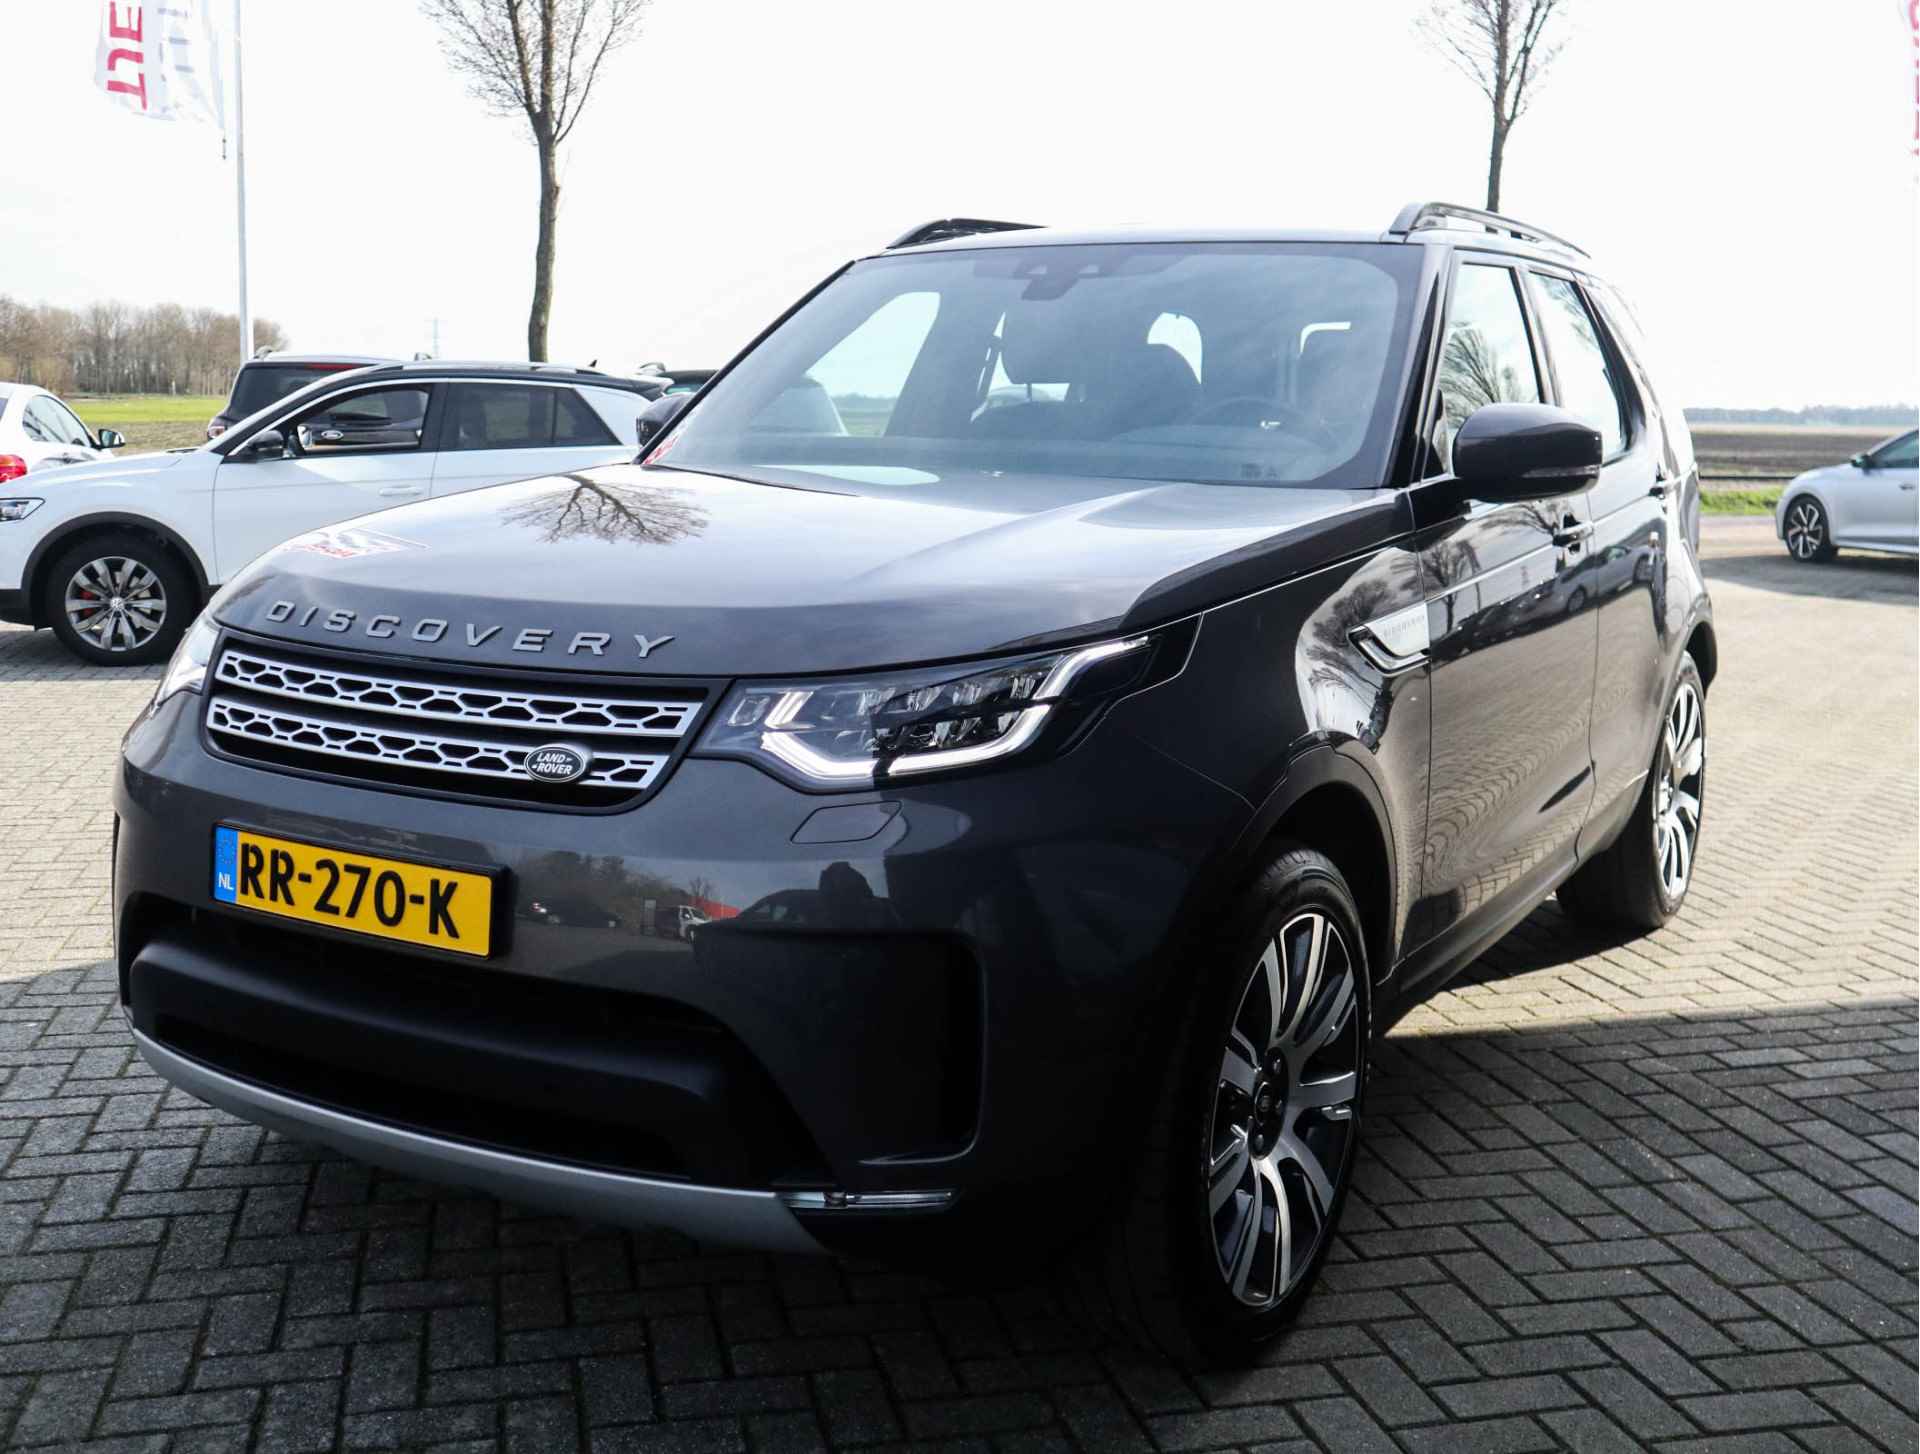 Land Rover Discovery 2.0 Sd4 HSE Luxury 7p. Navi/Clima/Leder/Panodak/7-Persoons/Luchtvering/Trekhaak - 11/34